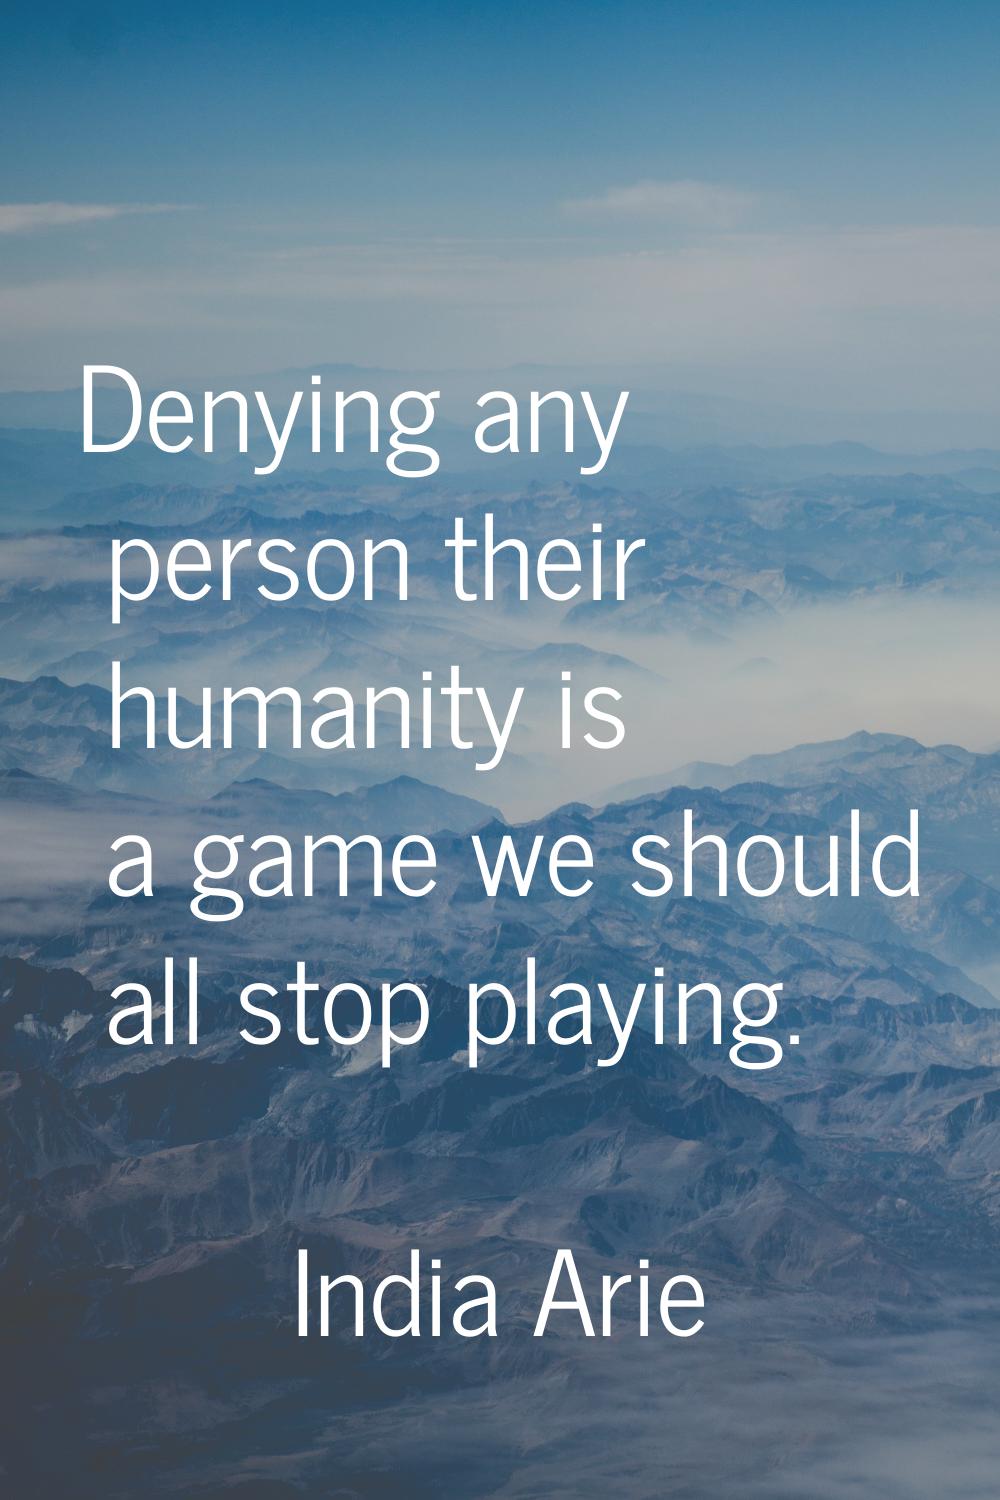 Denying any person their humanity is a game we should all stop playing.